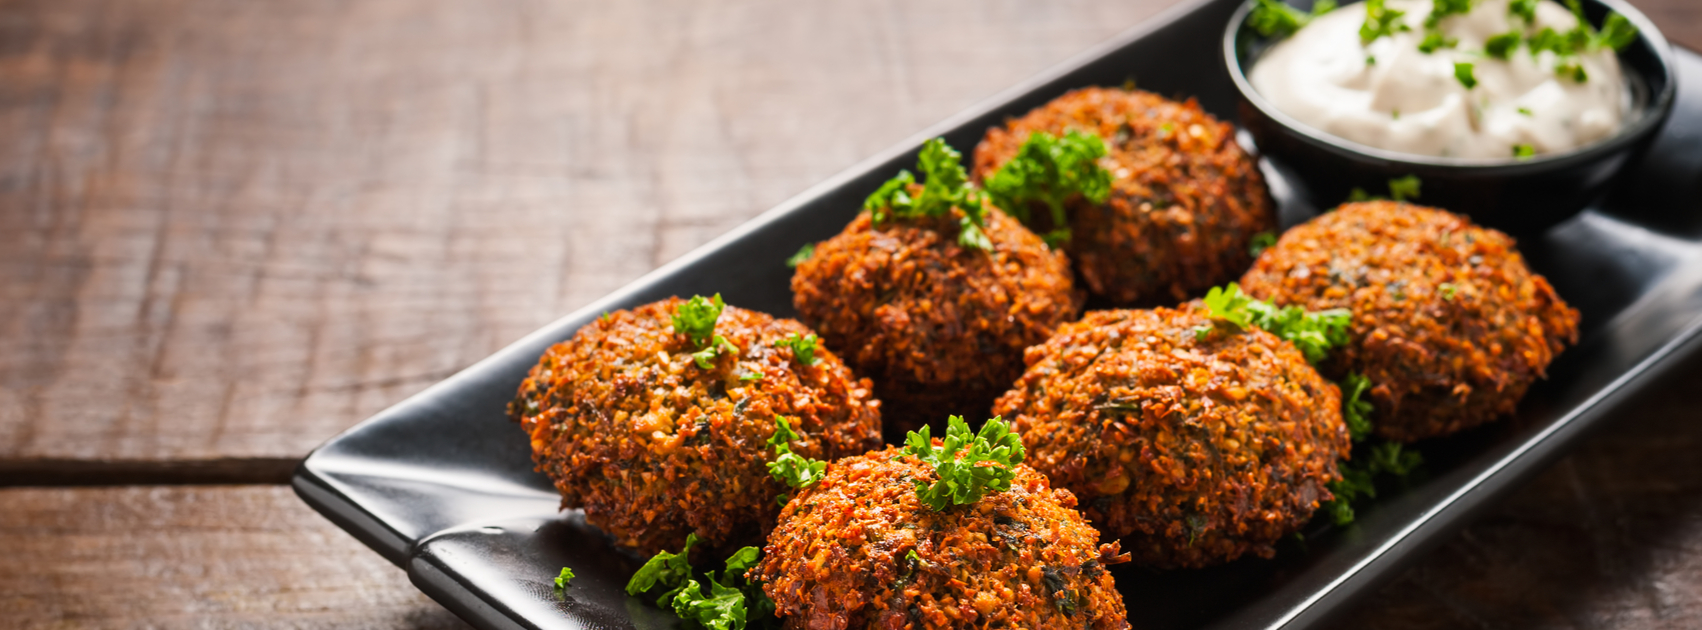 Delicious Israeli Recipes A Fabulous Israeli Falafel Recipe To Make At Home Sponsor An Olive Tree In Israel